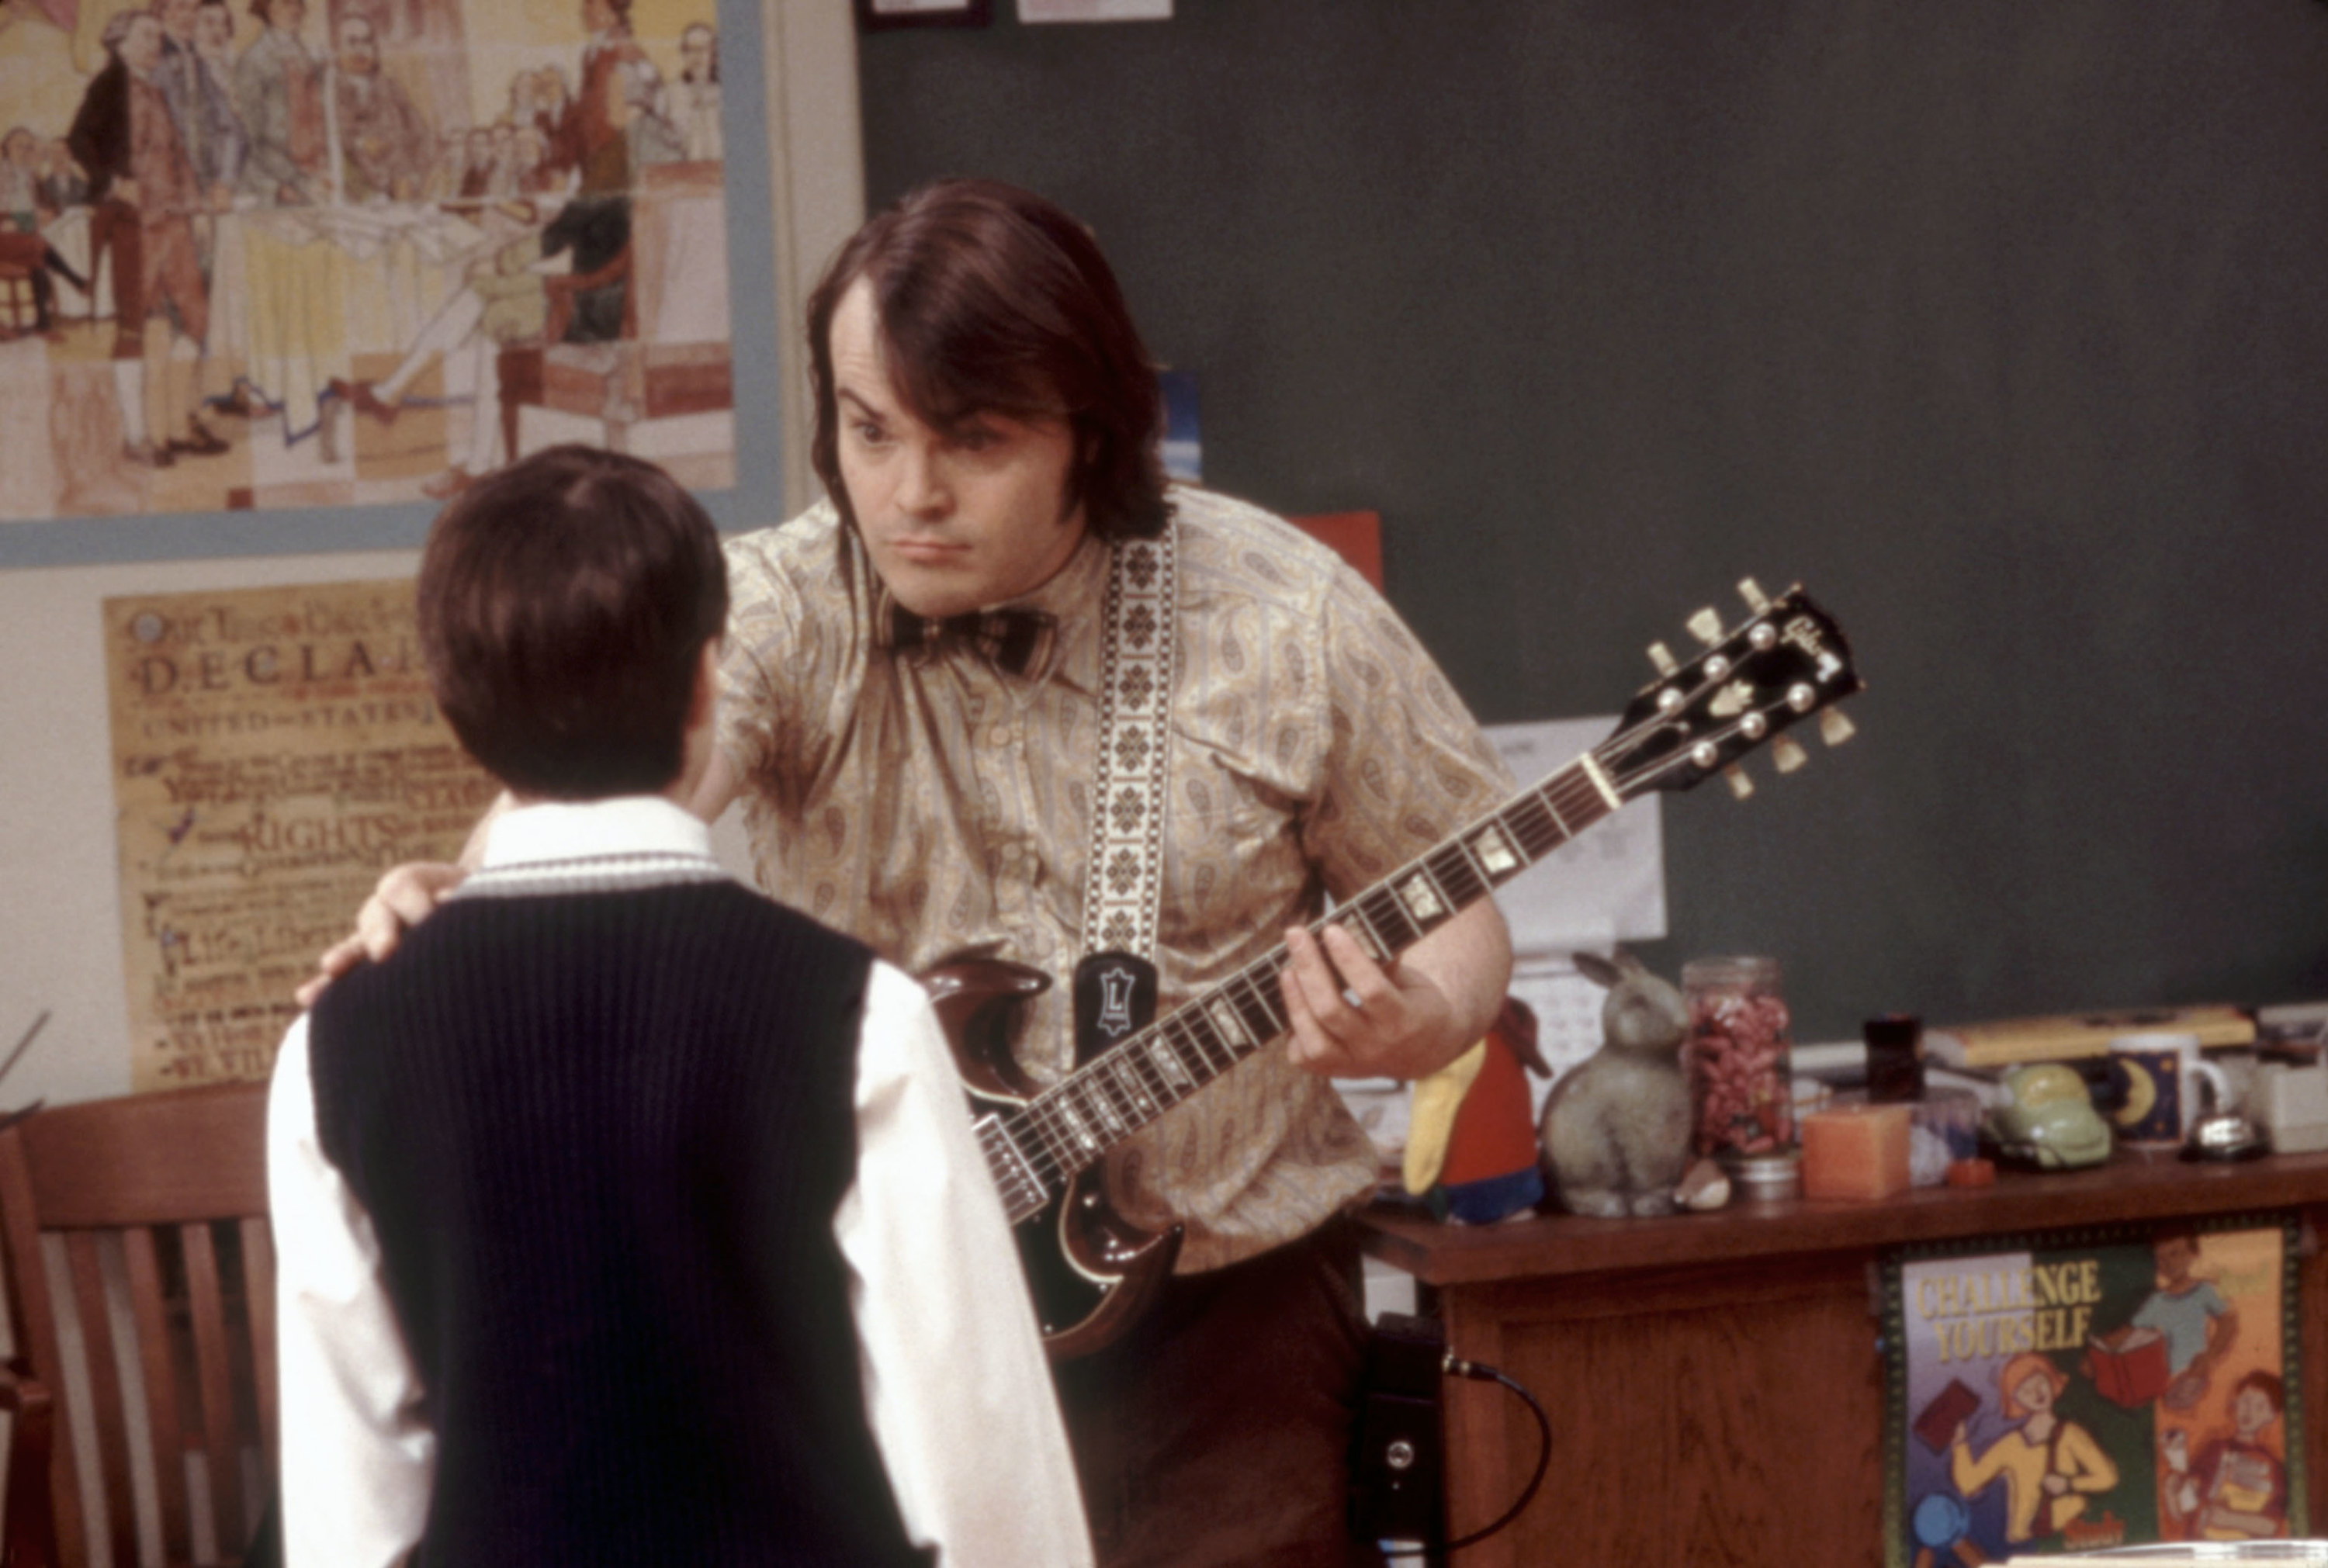 Jack in a classroom holding a guitar and looking at a student